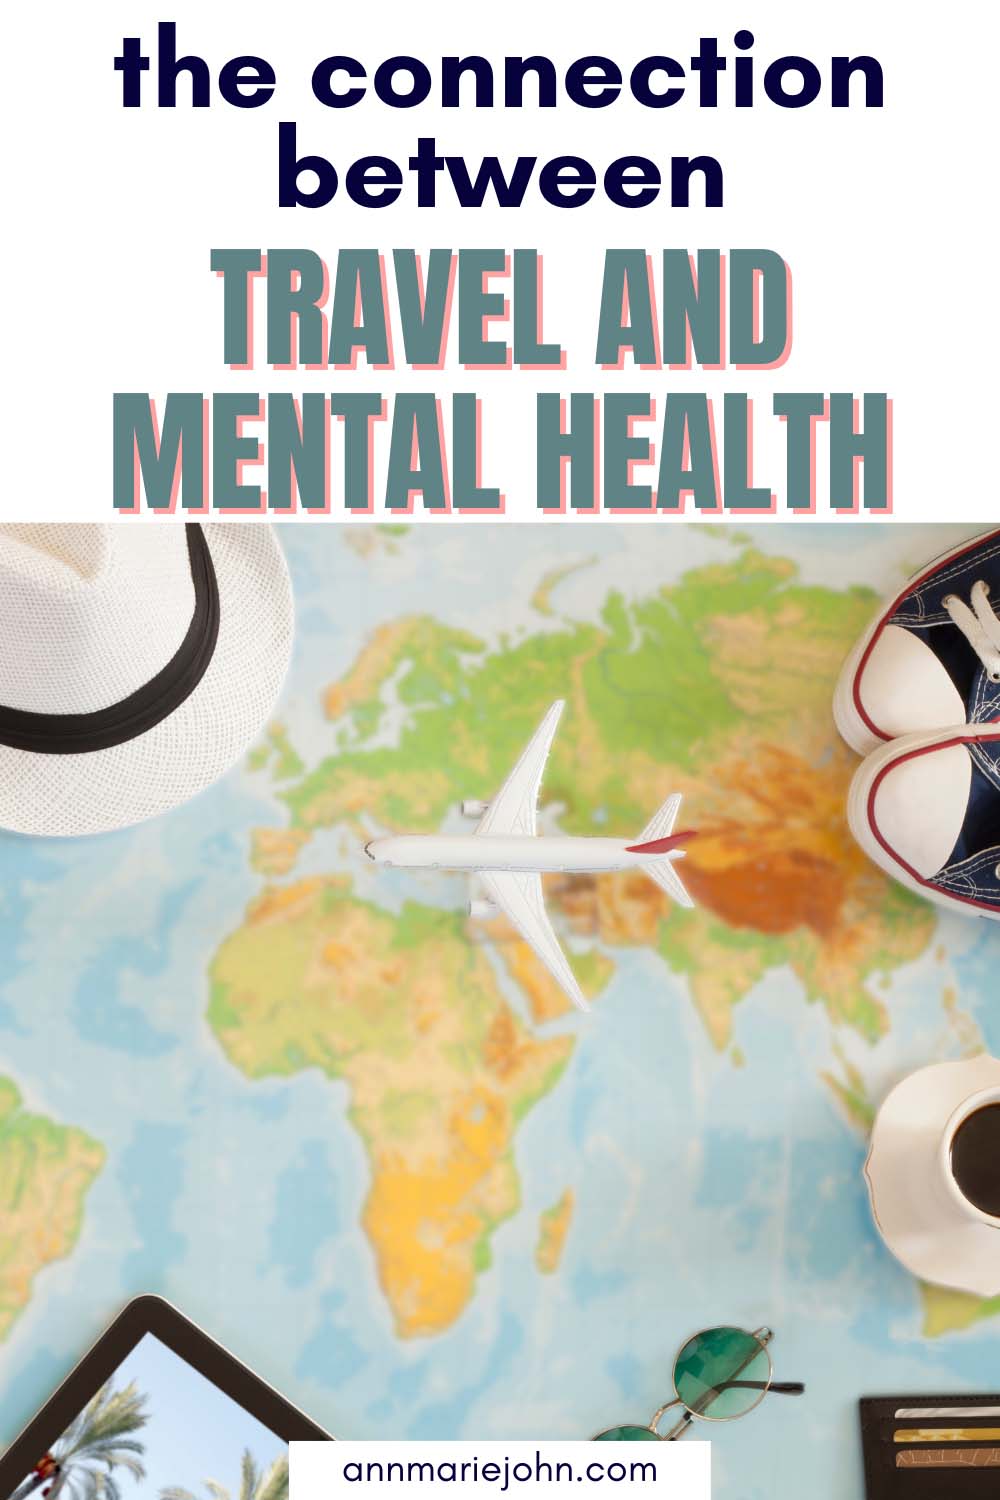 The Connection Between Travel and Mental Health